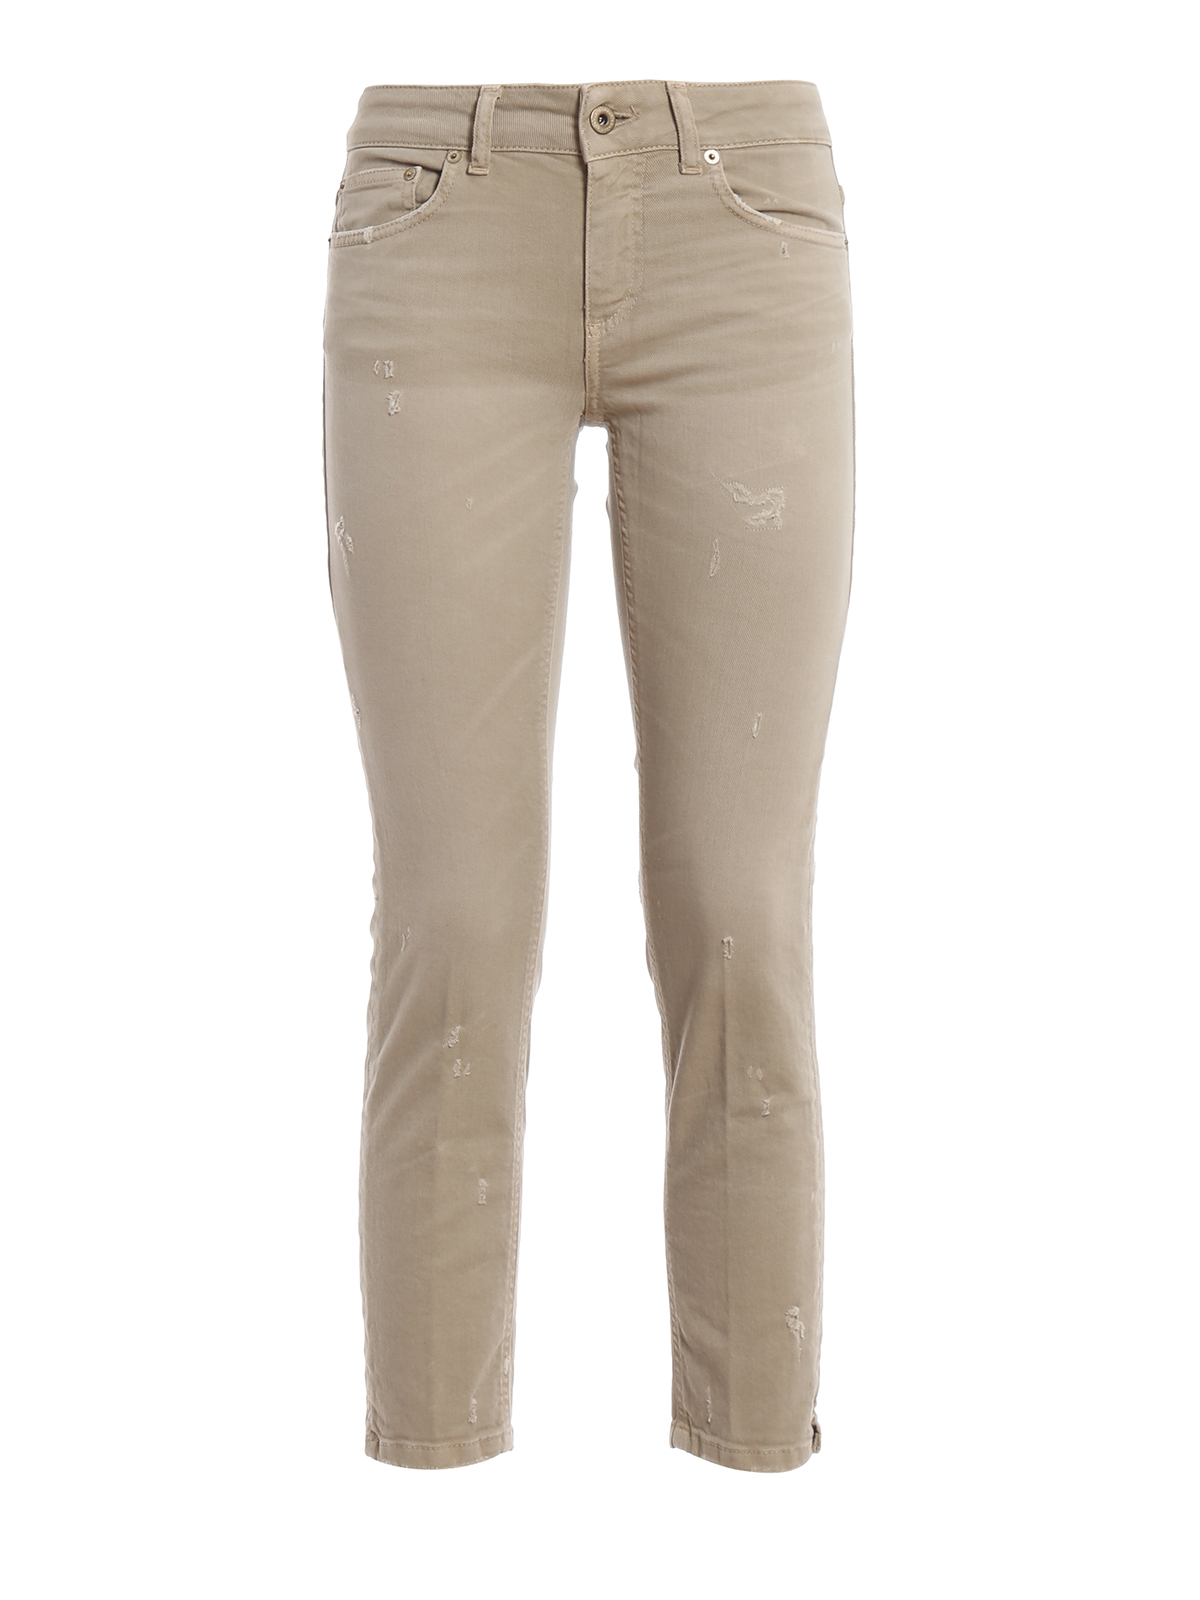 Skinny jeans Dondup - Newdia beige cropped jeans - DP405BS0009DU29026